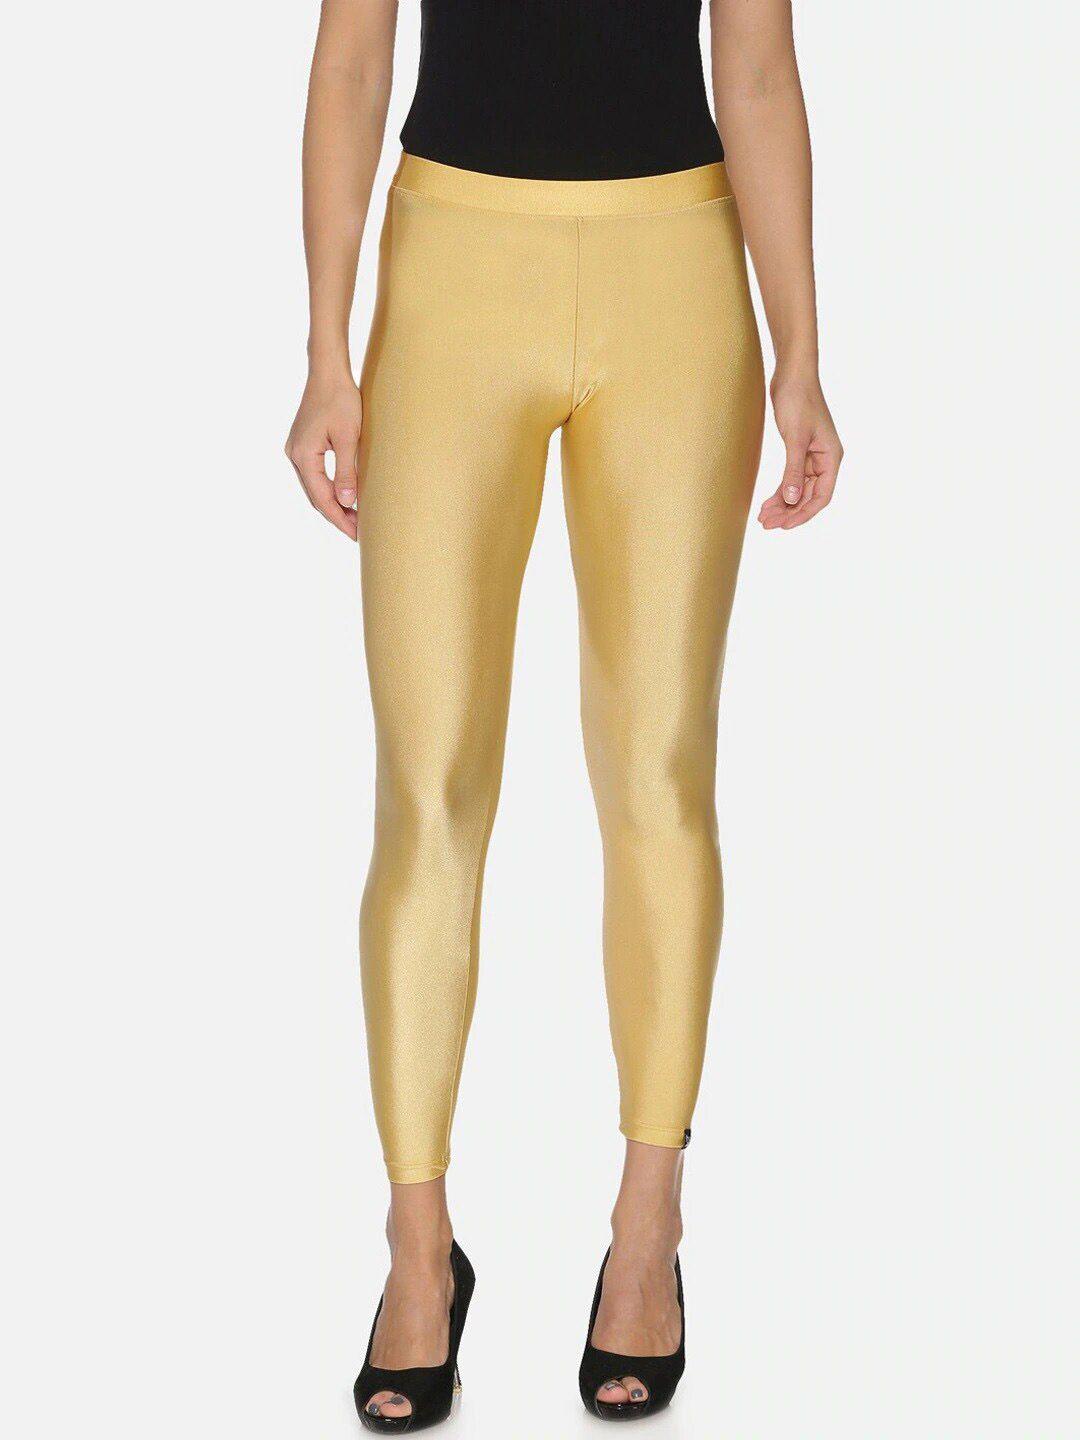 twin-birds-women-gold-colored-solid-ankle-length-leggings